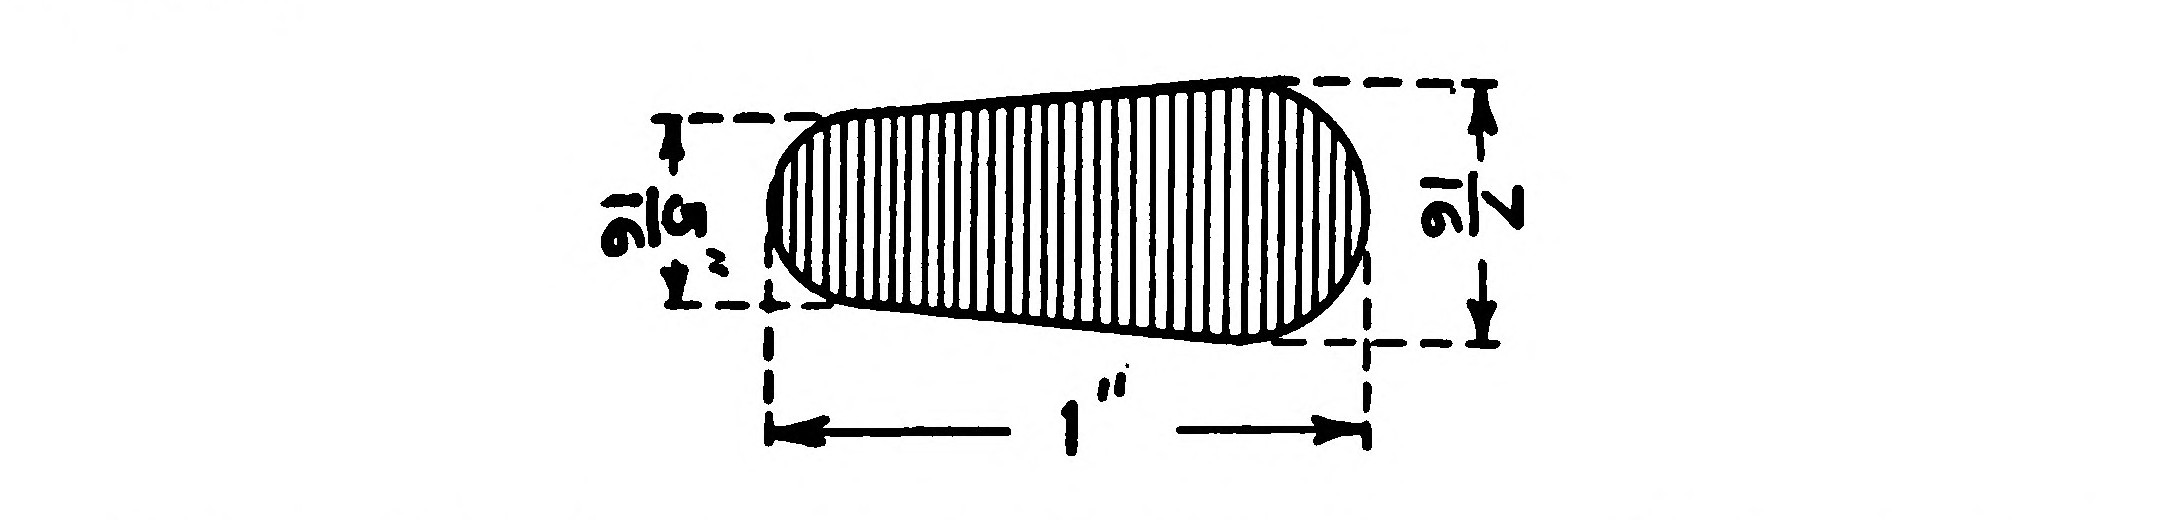 FIG. 3.—The details of the Tinfoil Sector.